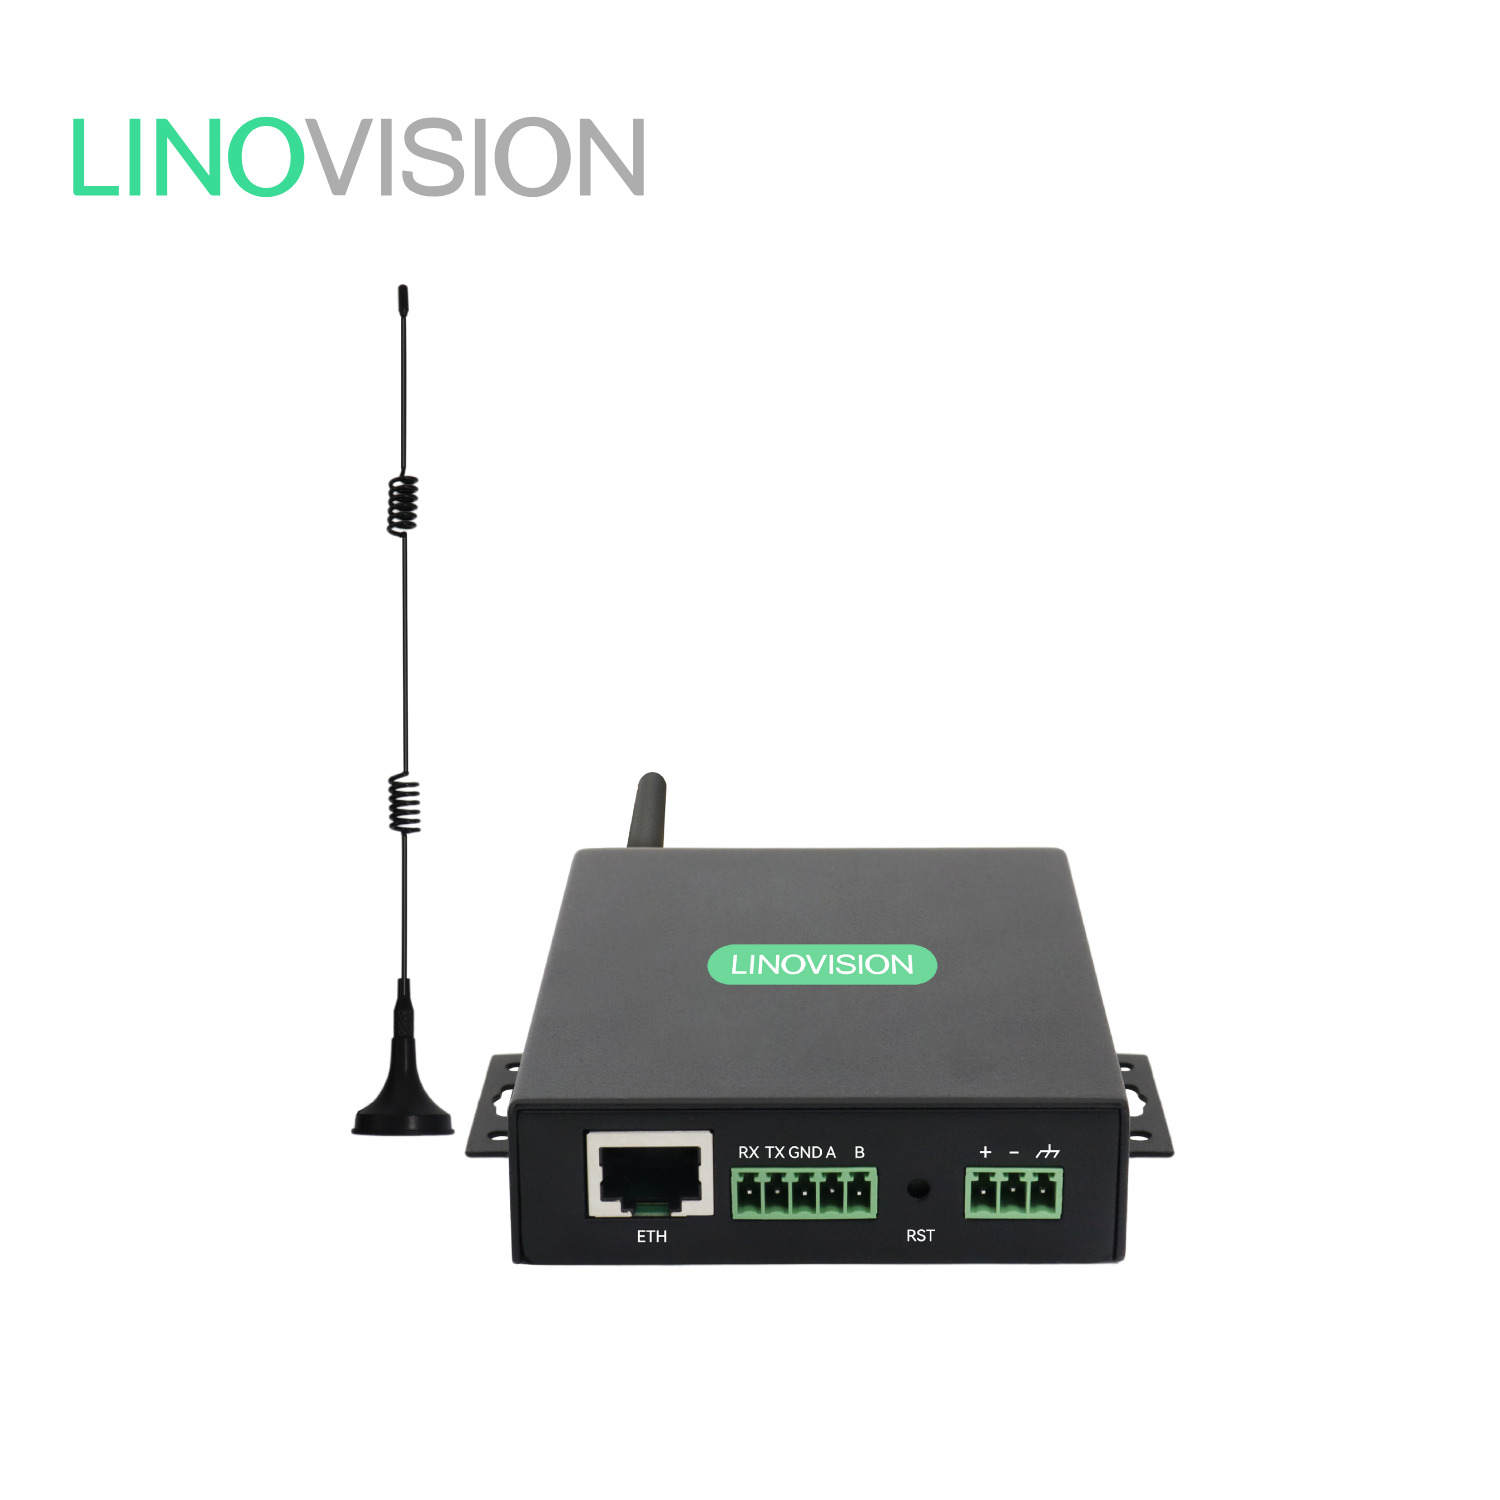 LINOVISION Industrial 4G LTE Router with Virtual SIM, eSIM Router Supports RS232